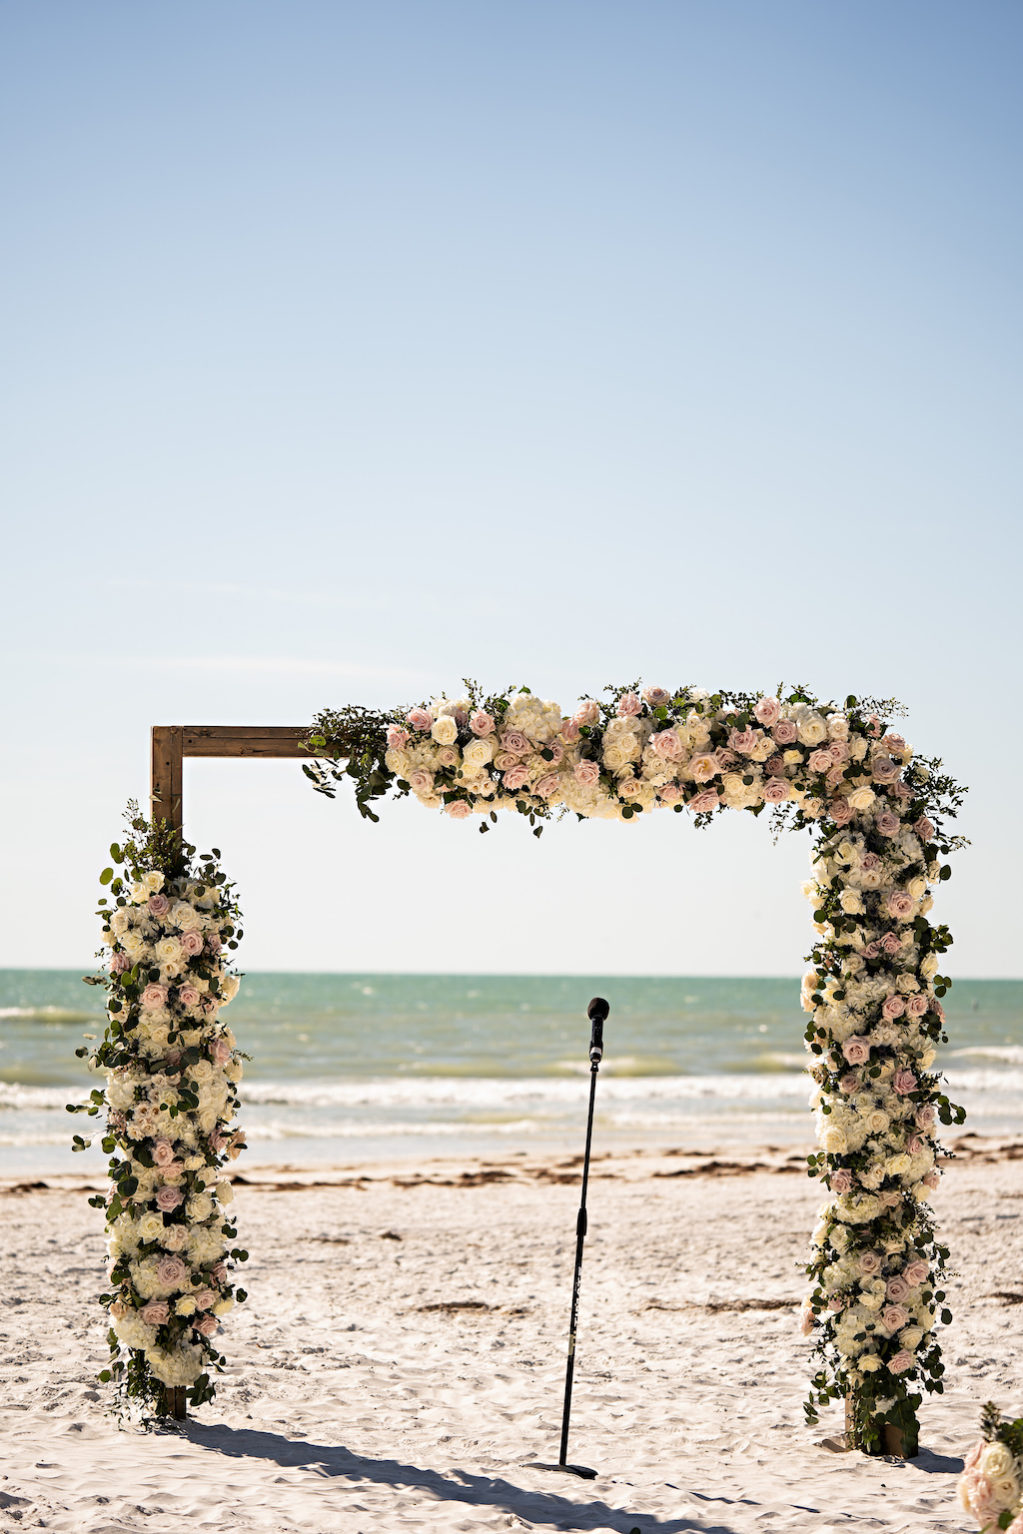 Romantic Garden Inspired Floral Square Wedding Arch at Oceanfront Ceremony on White Sand, White and Blush Pink Florals with Greenery | Tampa Bay Florist Bruce Wayne Florals | Florida Planner Parties A La Carte | St. Pete Beach Wedding Venue The Historic Don Cesar Hotel